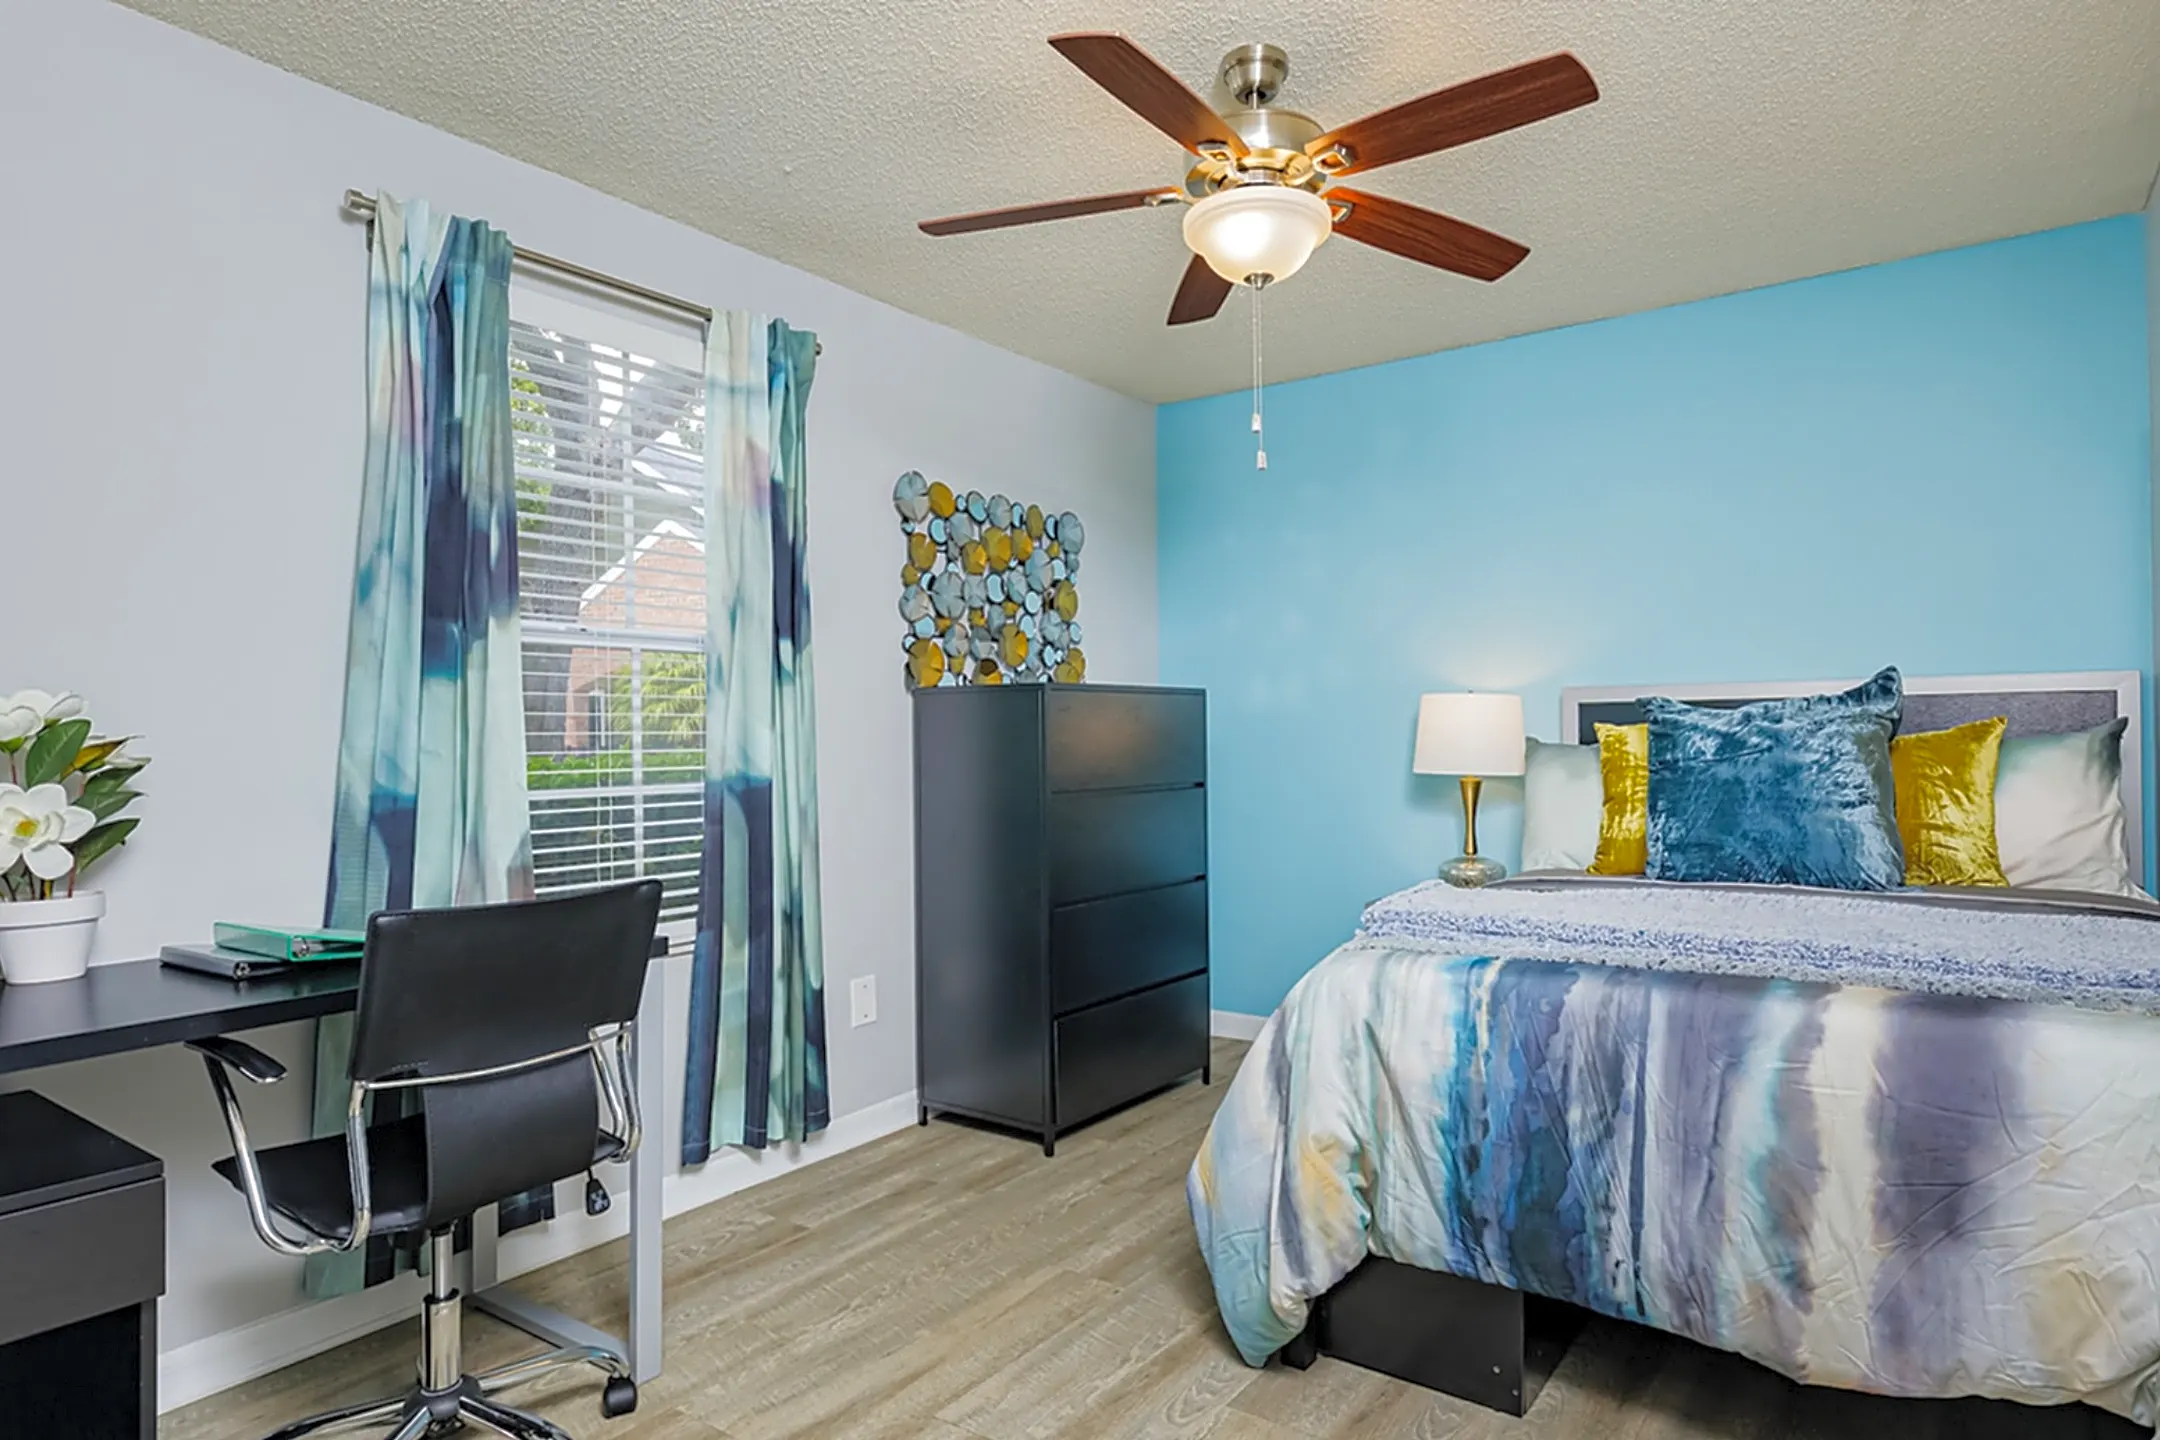 Bedroom - Reflections Apartments - Per Bed Lease - Tampa, FL